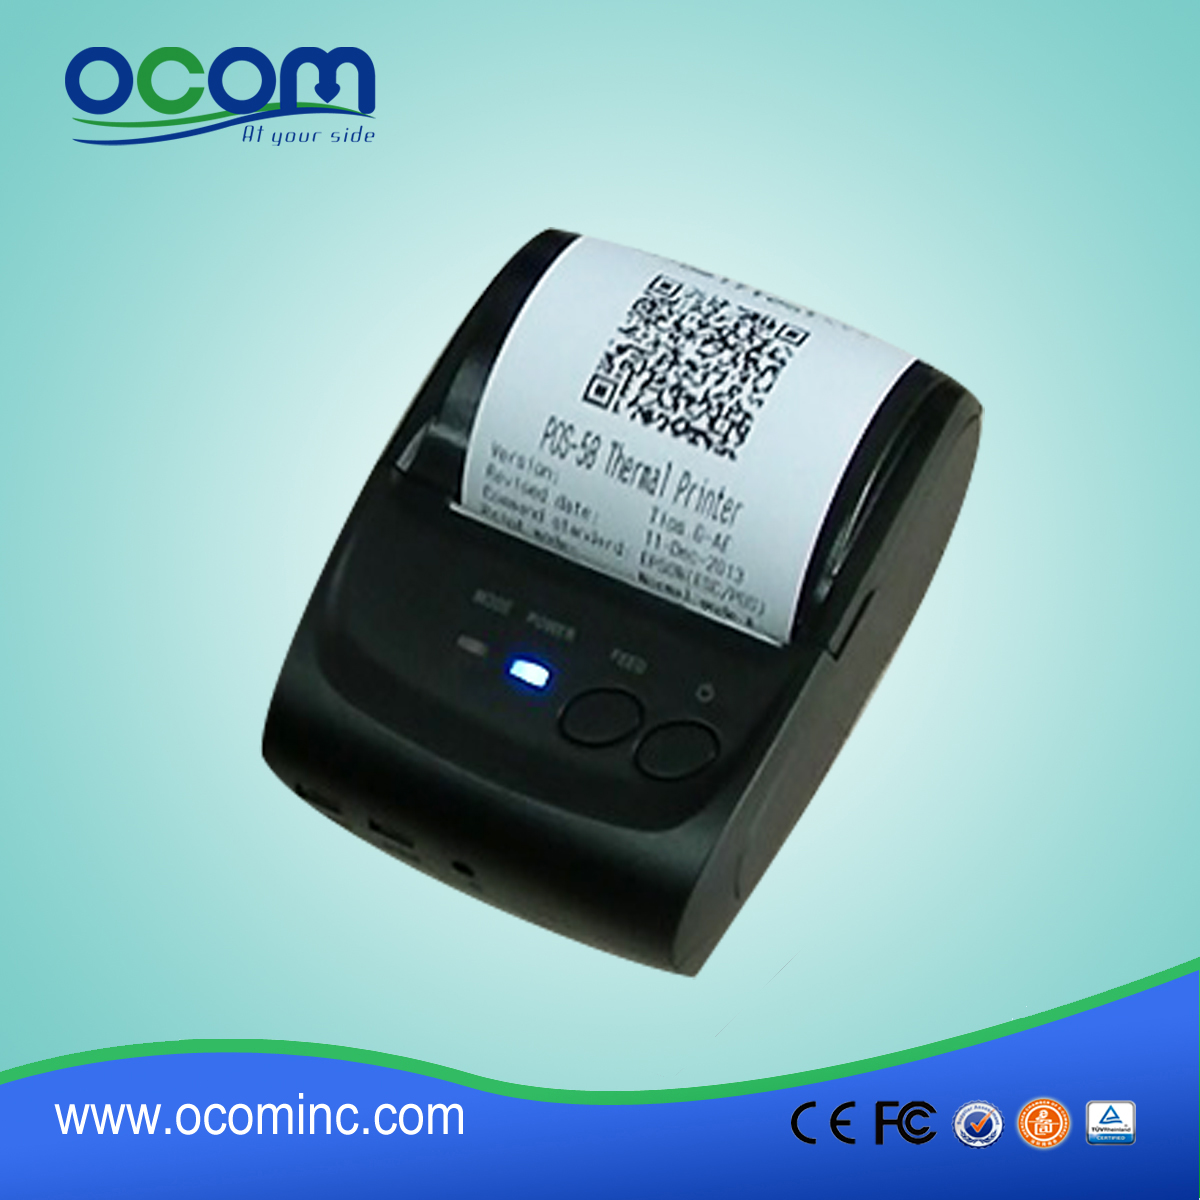 58mm Mini Bluetooth Thermal Receipt Printer for Android or iOS